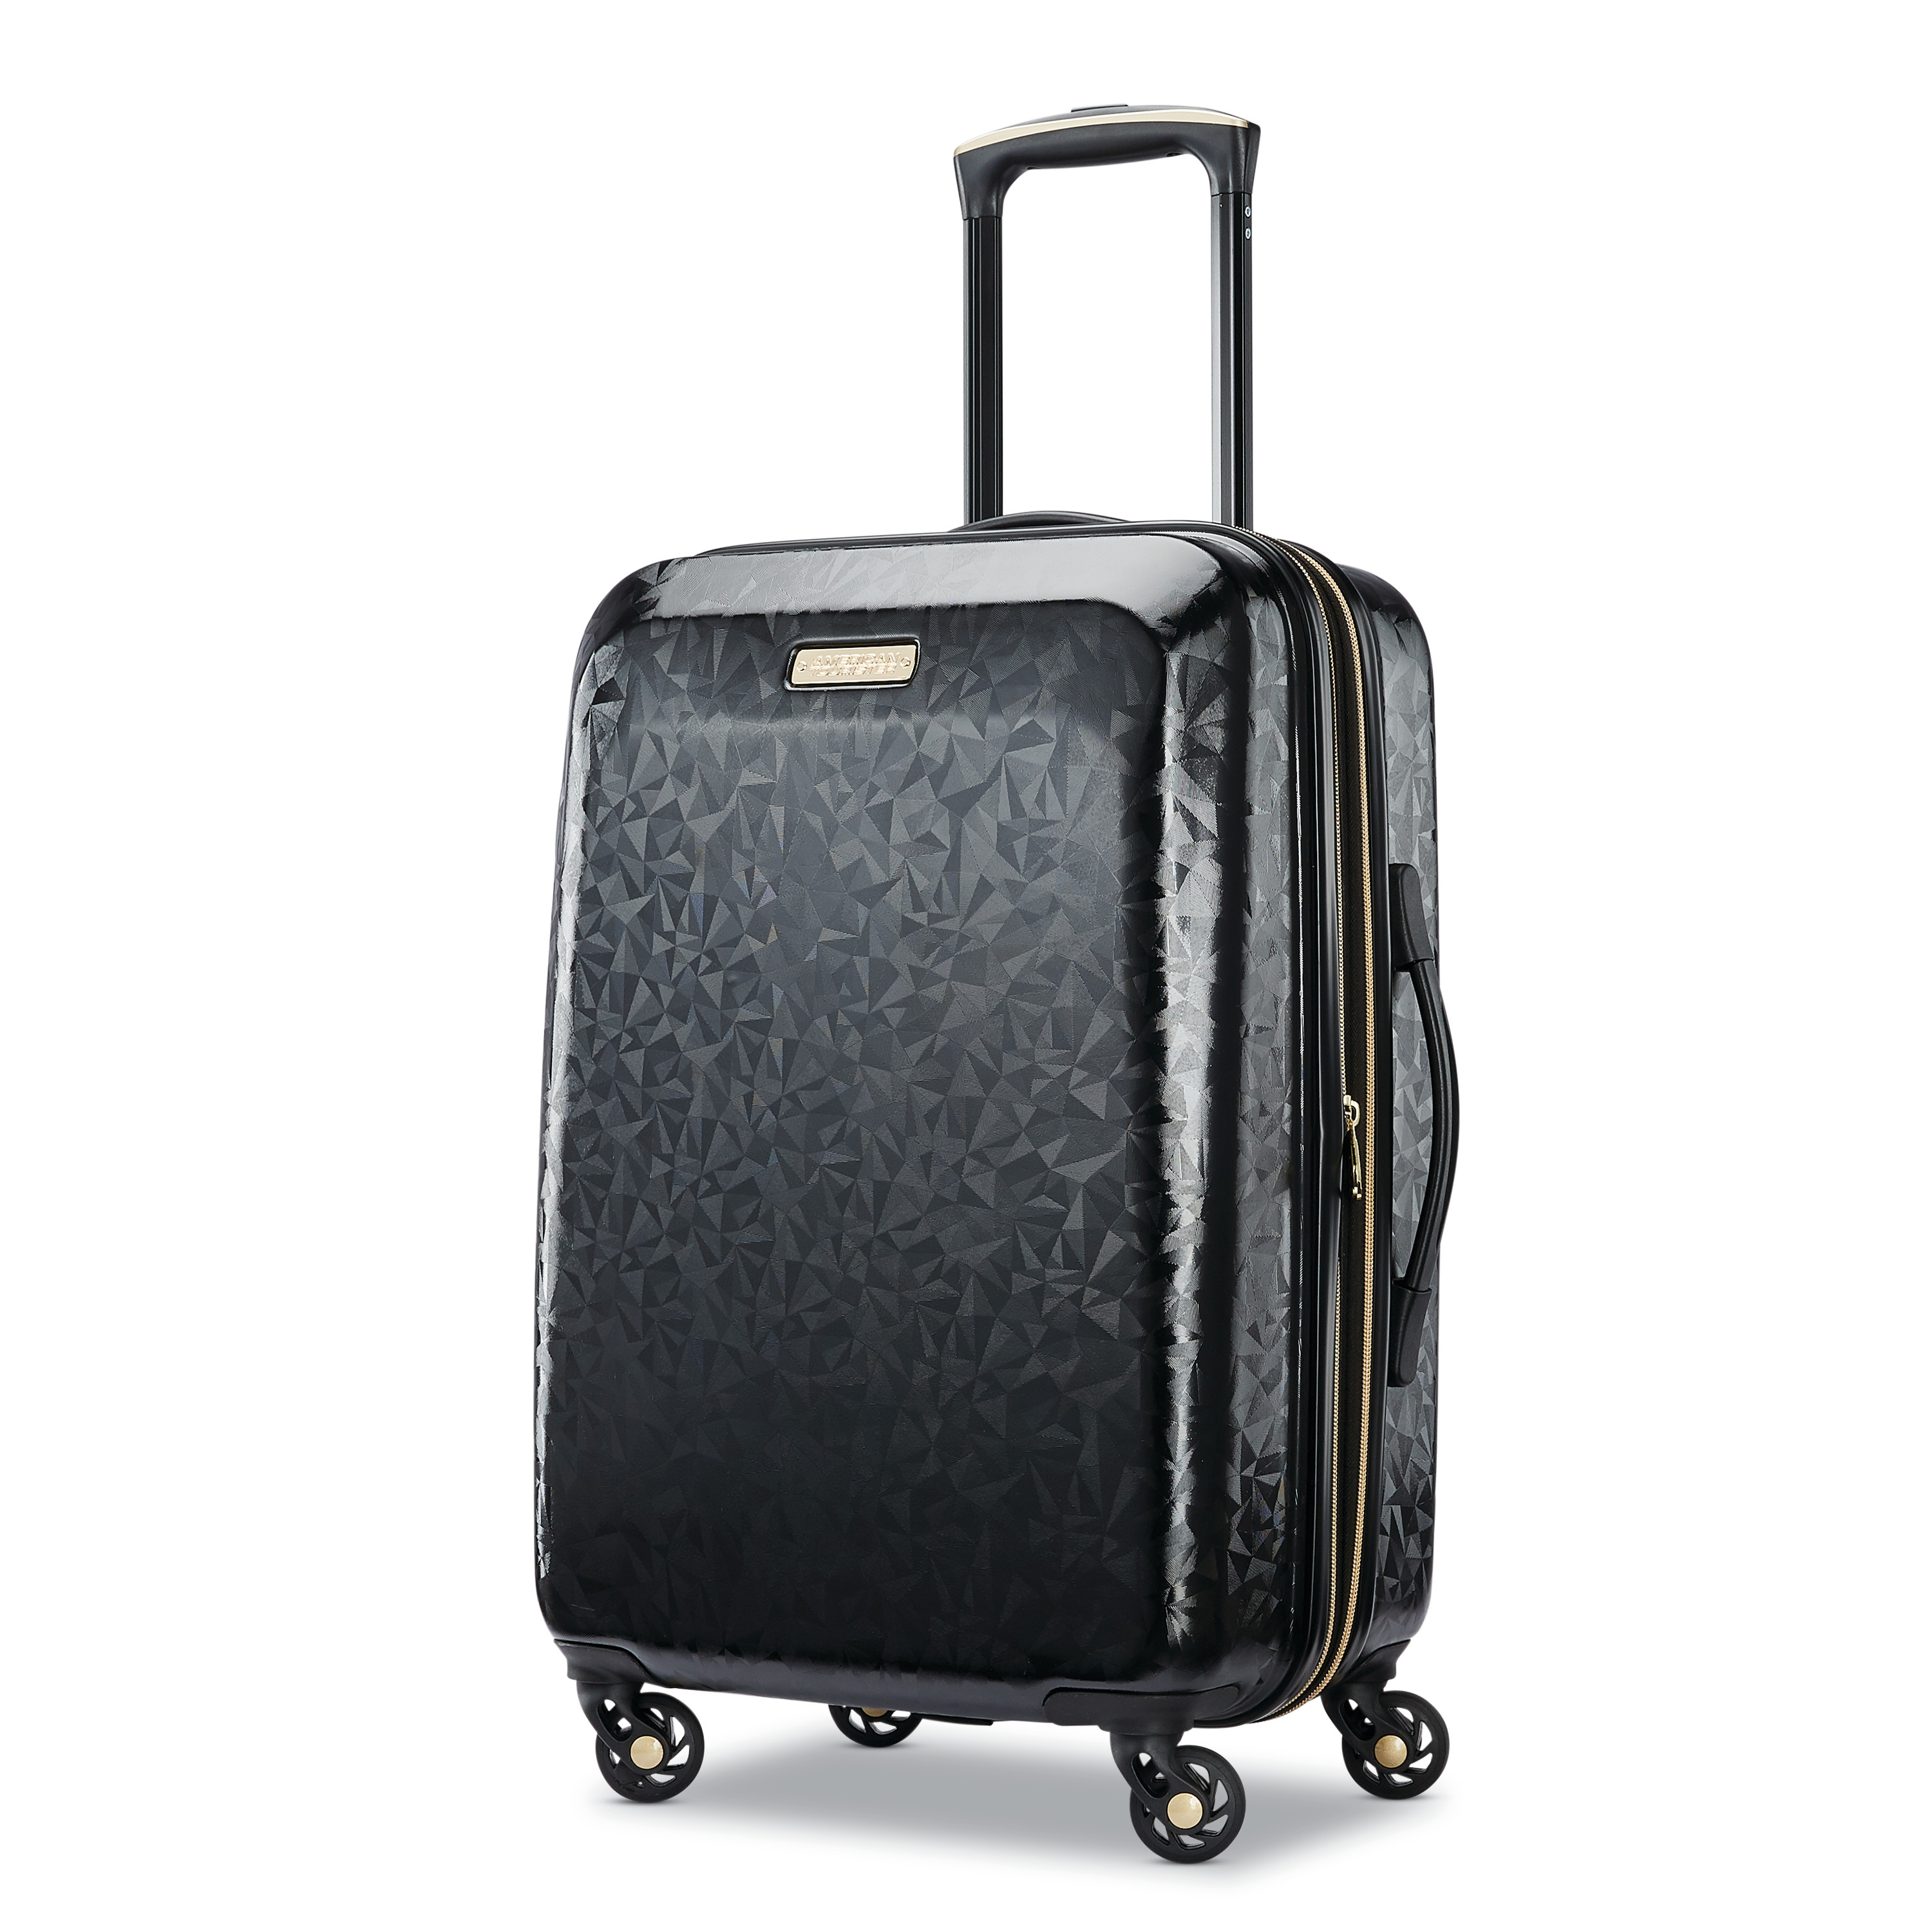 American Tourister Belle Voyage 20-inch Hardside Spinner, Carry-On Luggage, One Piece - image 1 of 7